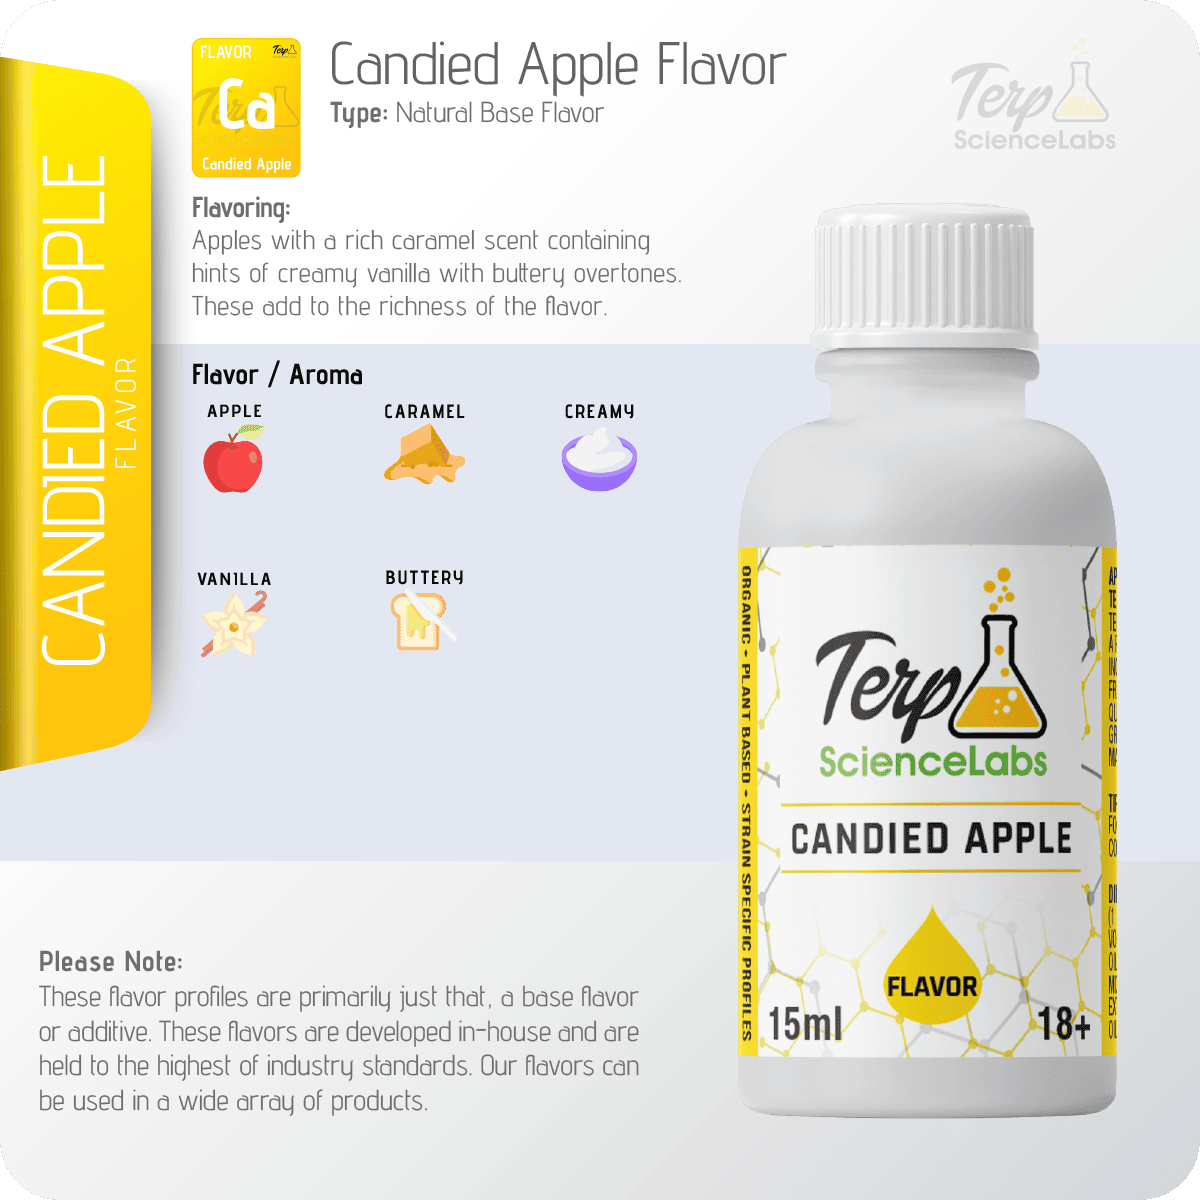 Candied Apple Flavor Profile